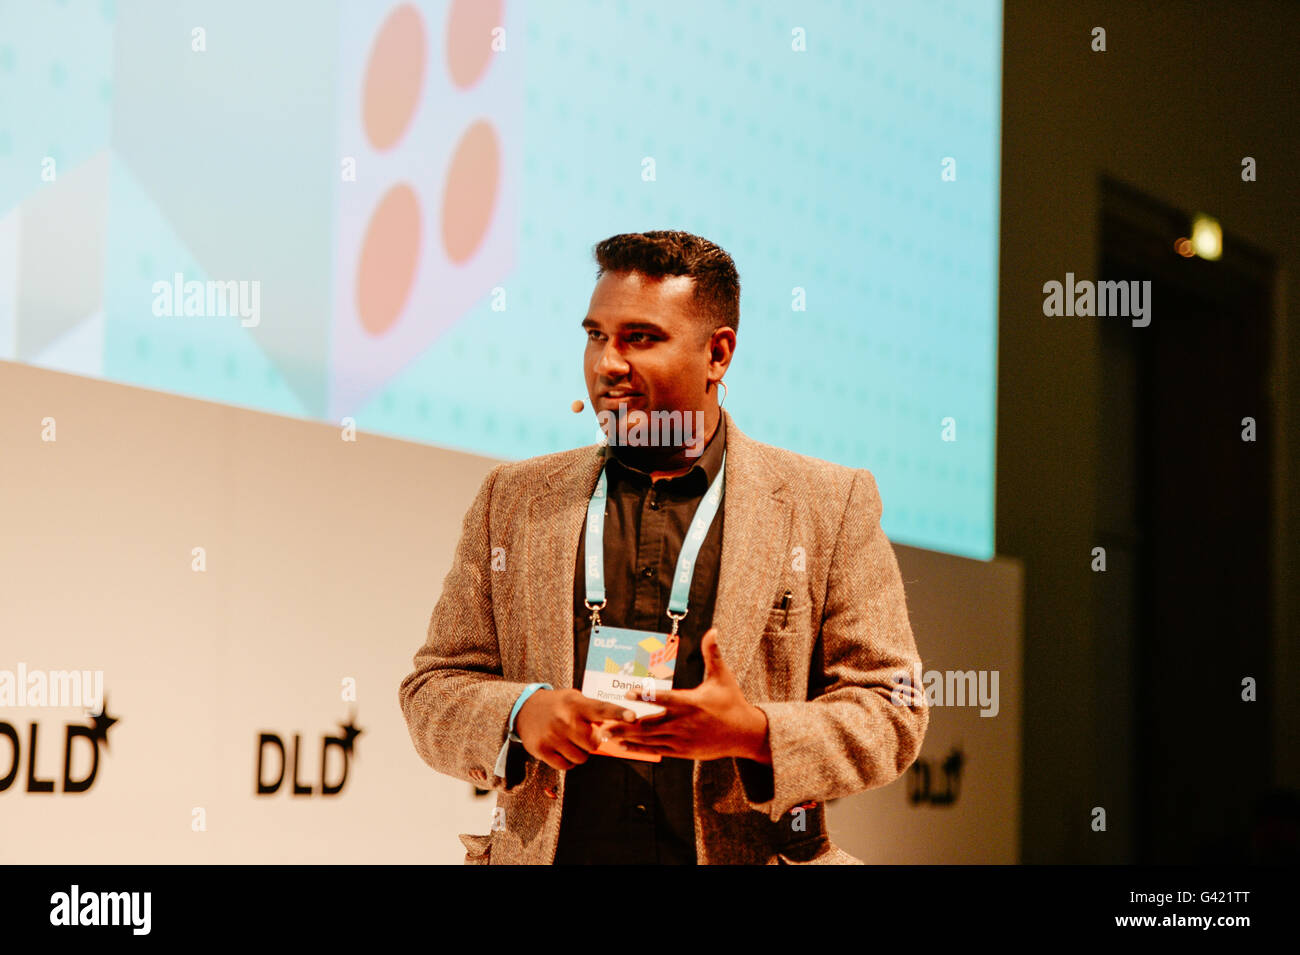 MUNICH/GERMANY - JUNE 16: Entrepreneur Daniel Ramamoorthy speaks onstage during the DLDsummer Conference 2016 at Haus der Kunst, Munich. DLDsummer takes place June 16-17, 2016 and focuses on the changing through digitalization in the areas of life, work and business (Photo: picture alliance for DLD/Jan Haas) | usage worldwide Stock Photo